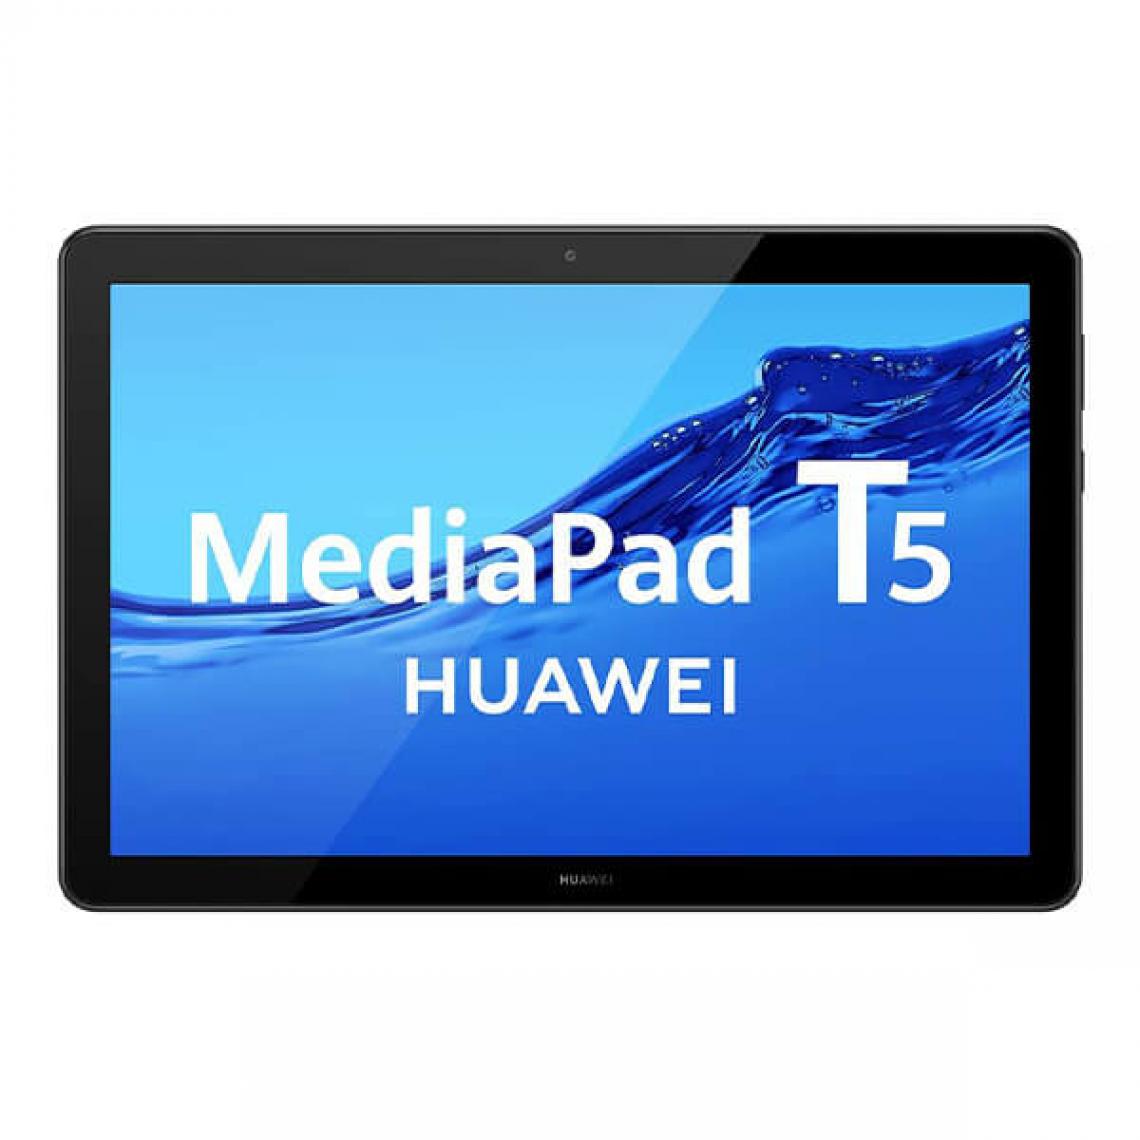 Huawei - Huawei MediaPad T5 10,1" 2Go/32Go LTE Noir - Tablette Android